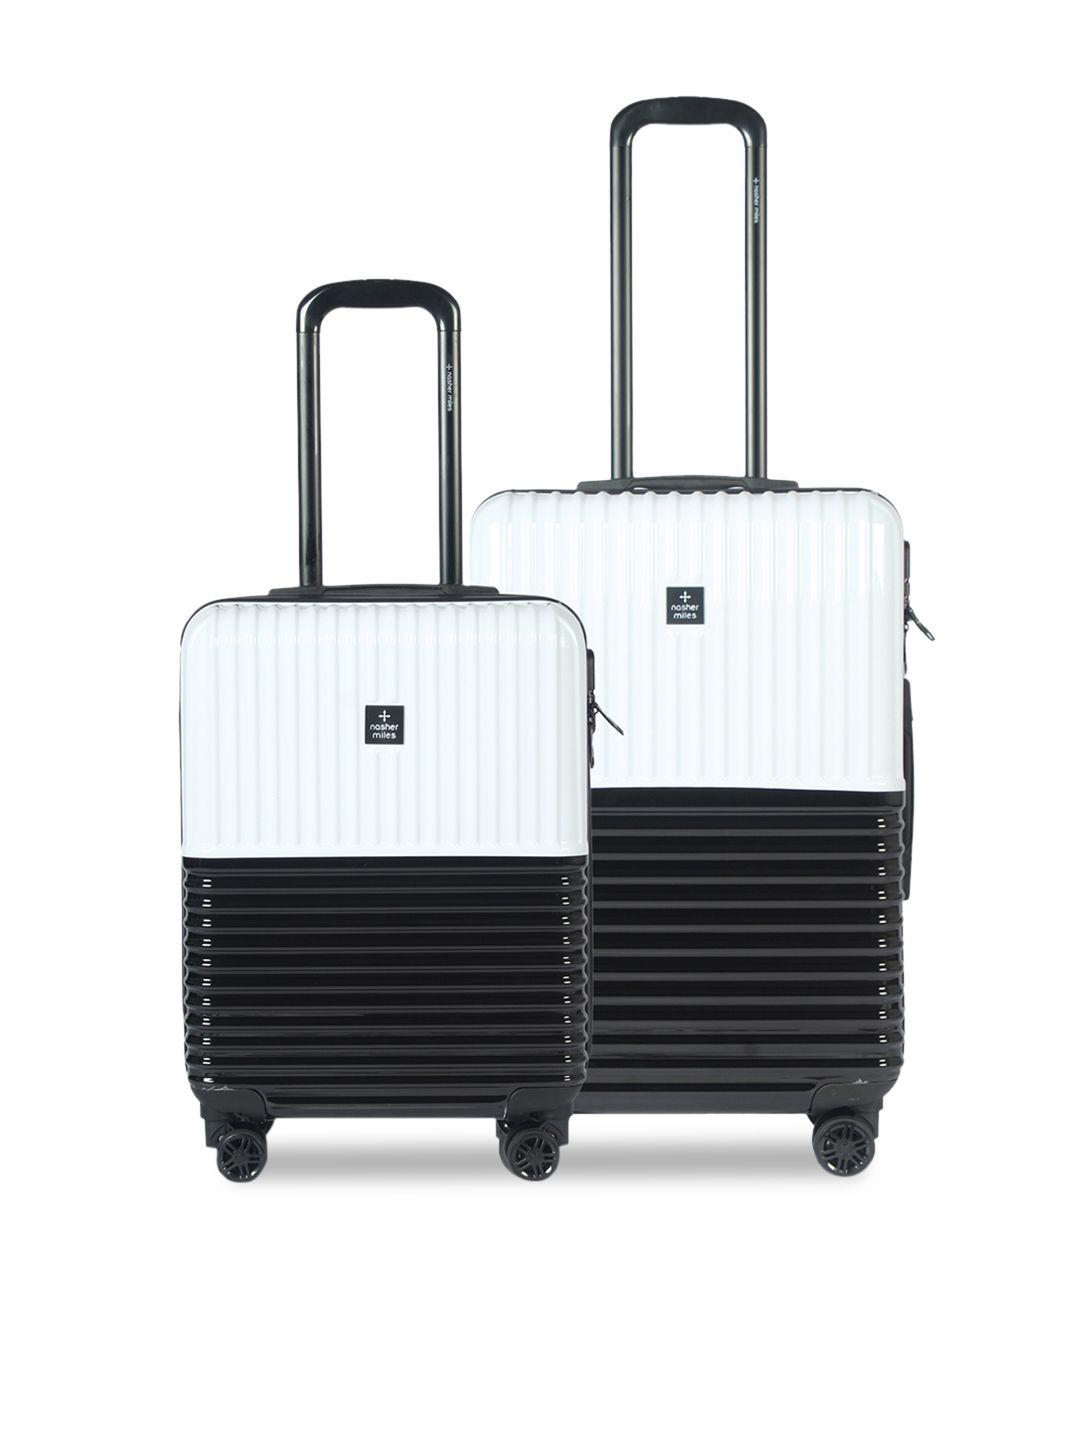 nasher miles set of 2 istanbul colourblocked hard-sided trolley bags- 55 cm & 65 cm